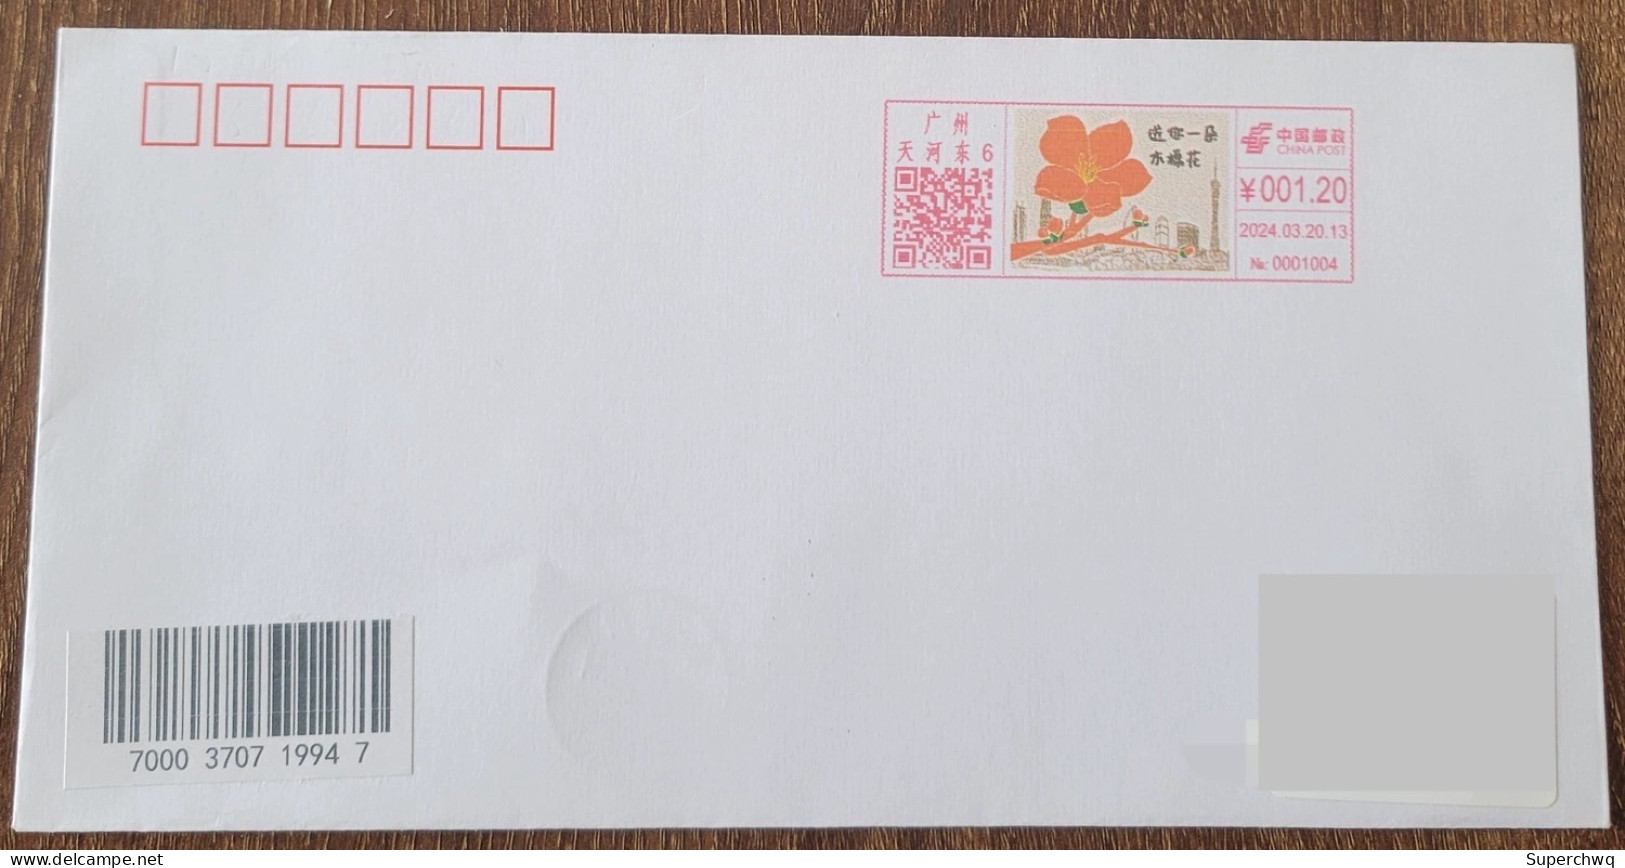 China Posted Cover "Kapok" (Guangzhou Tianhe East) Color Postage Machine Stamp First Day Actual Shipping Seal - Covers